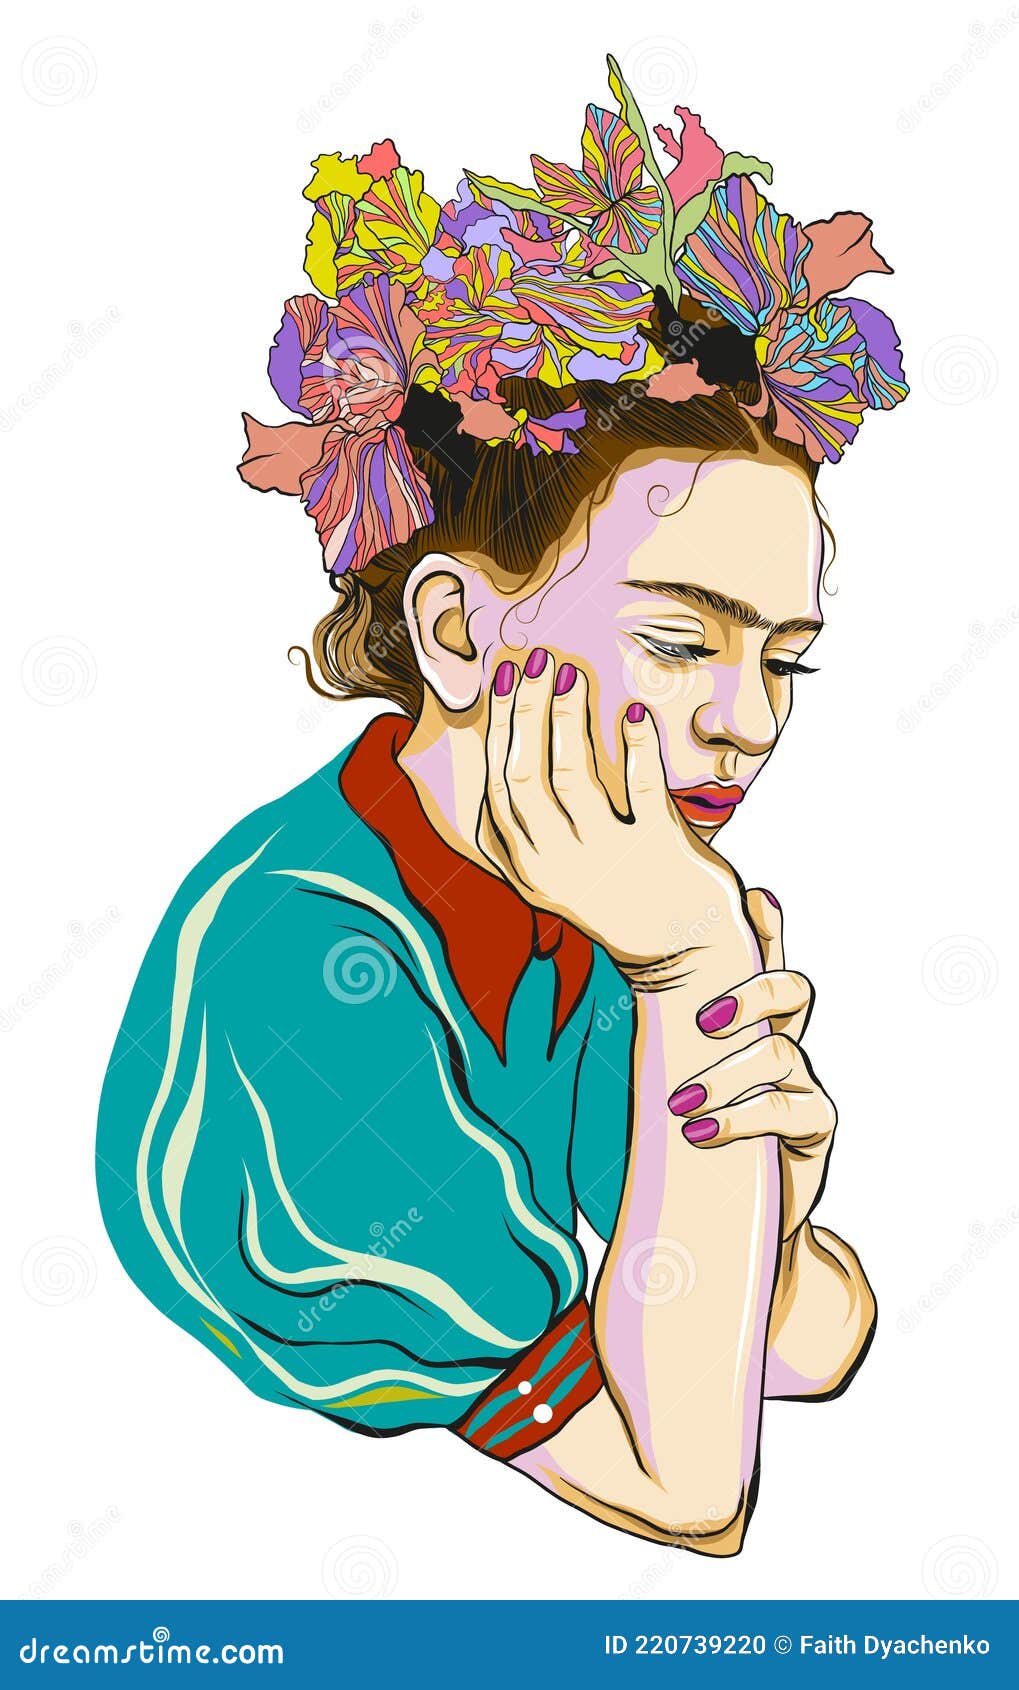 pensive frida kahlo with wreath from flowers.